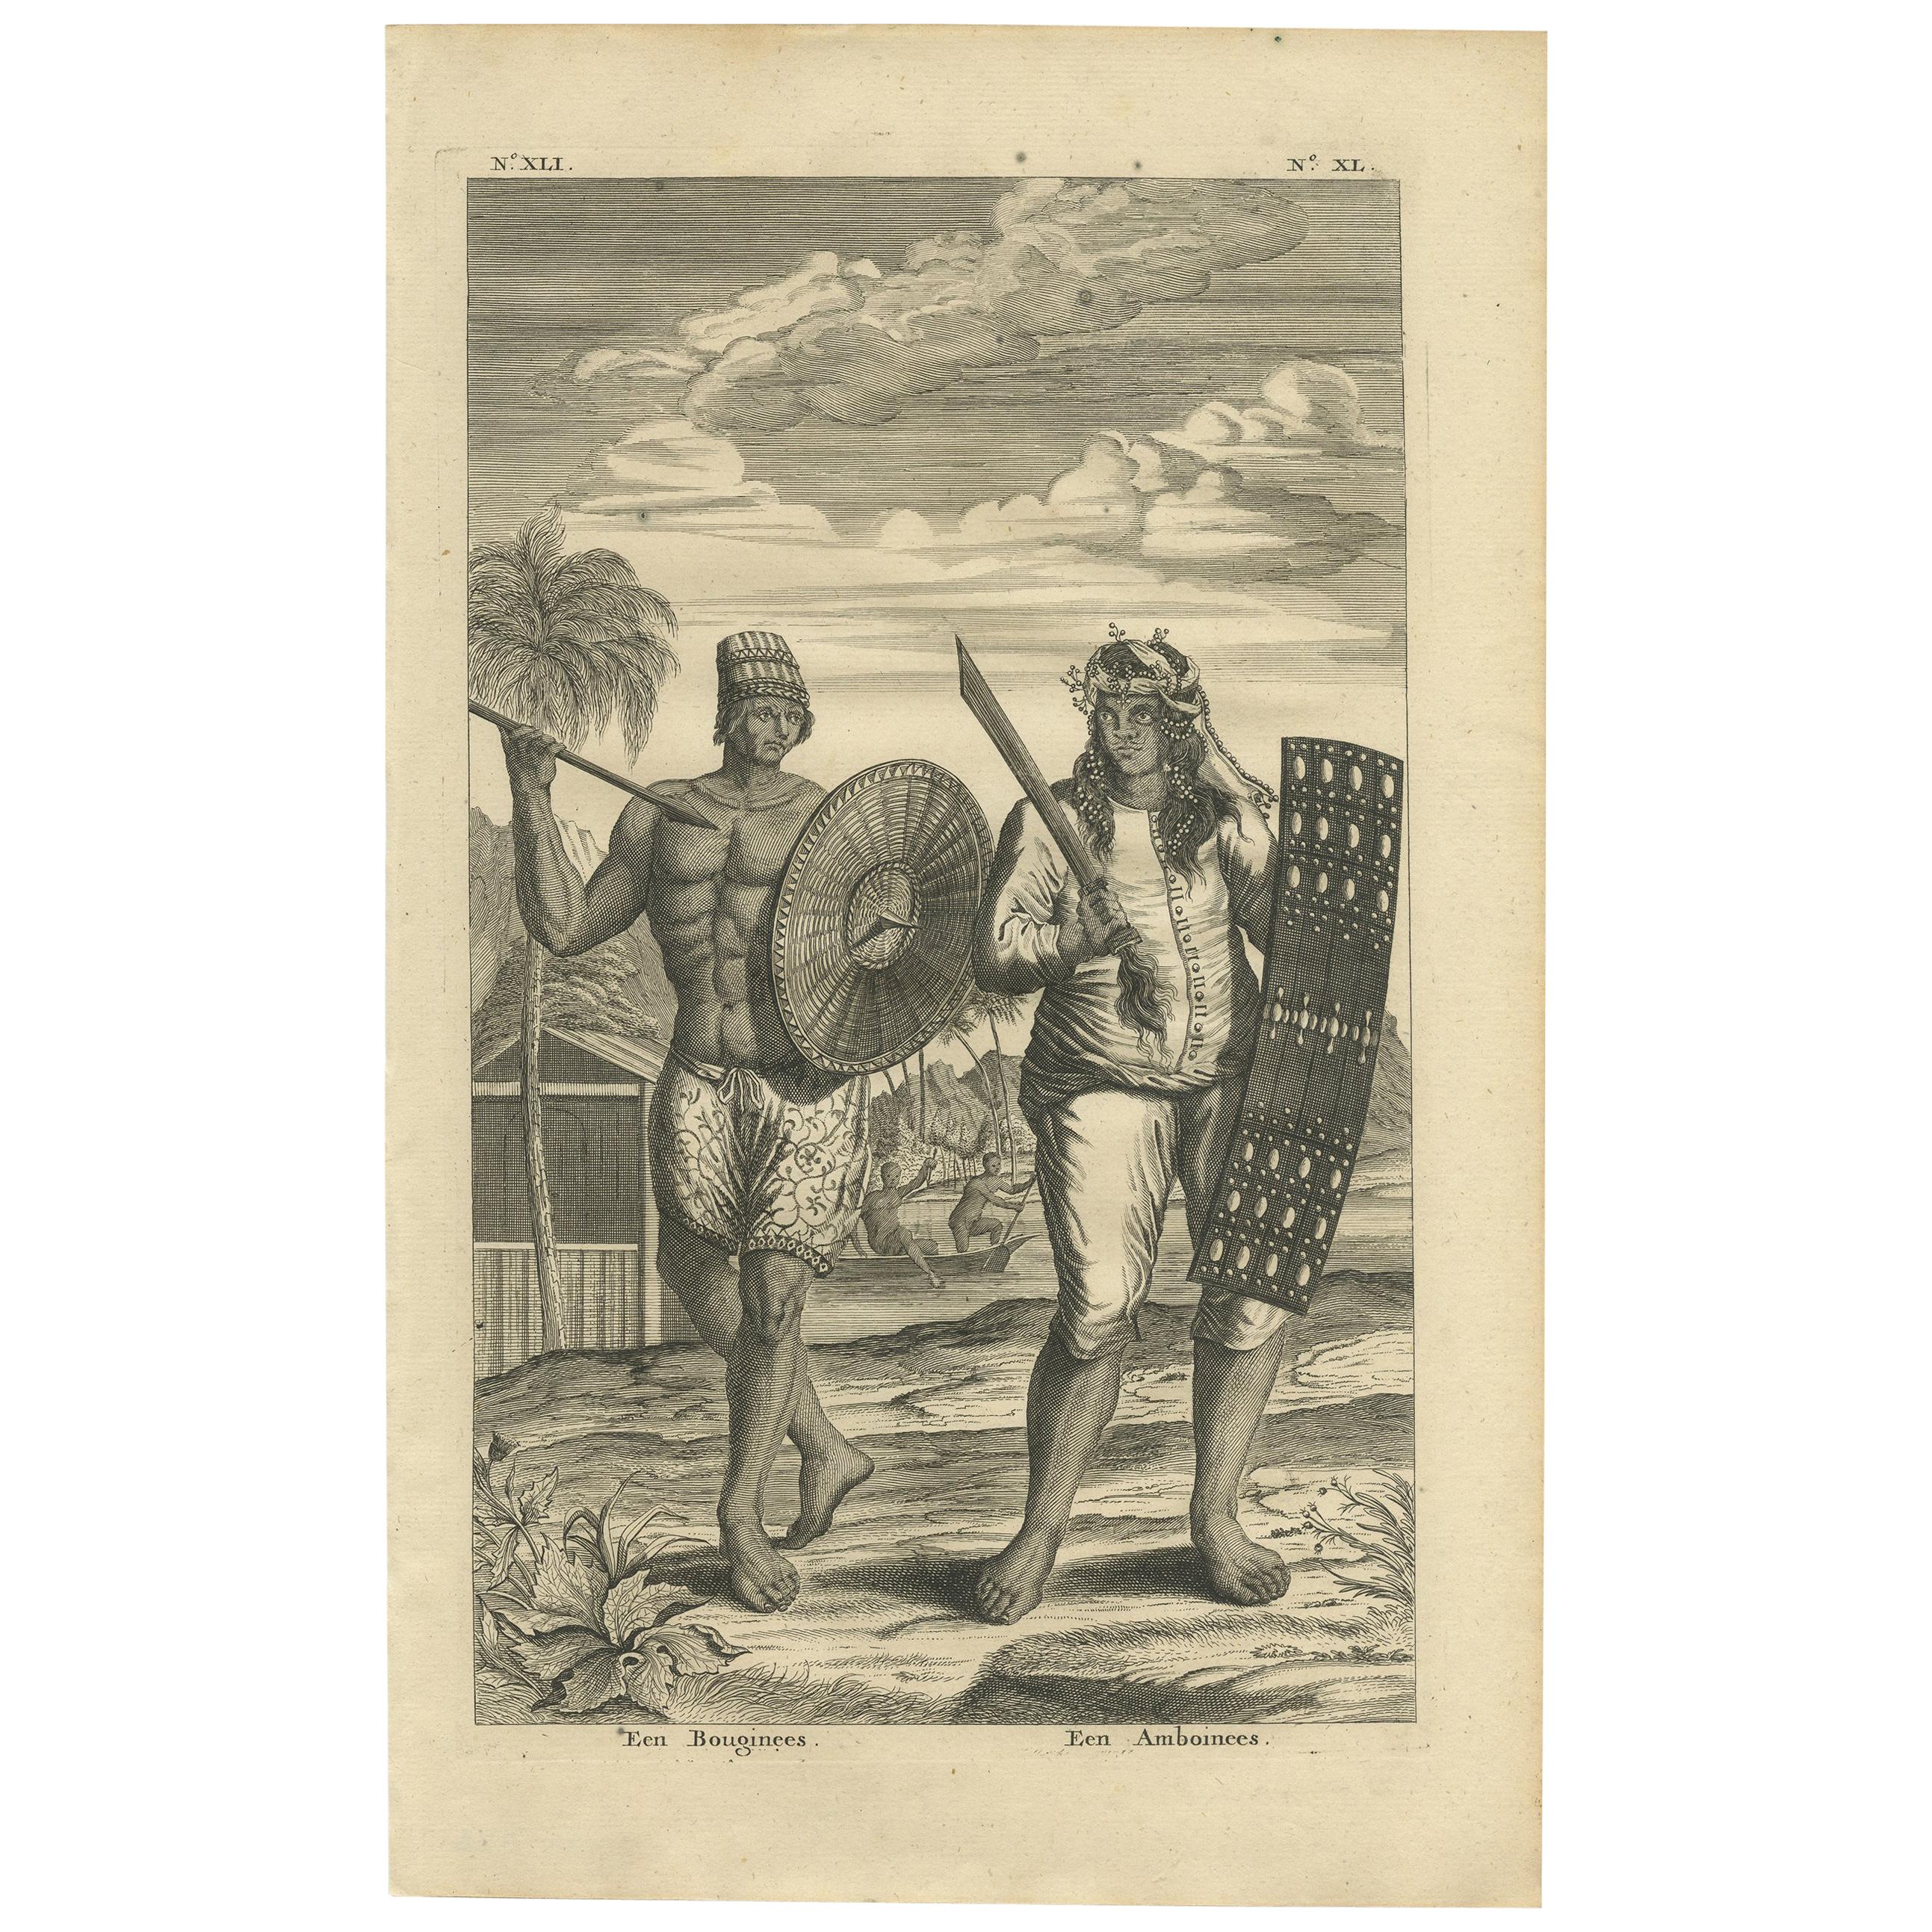 Antique Print of a Buginese and Ambonese Man by Valentijn, 1726